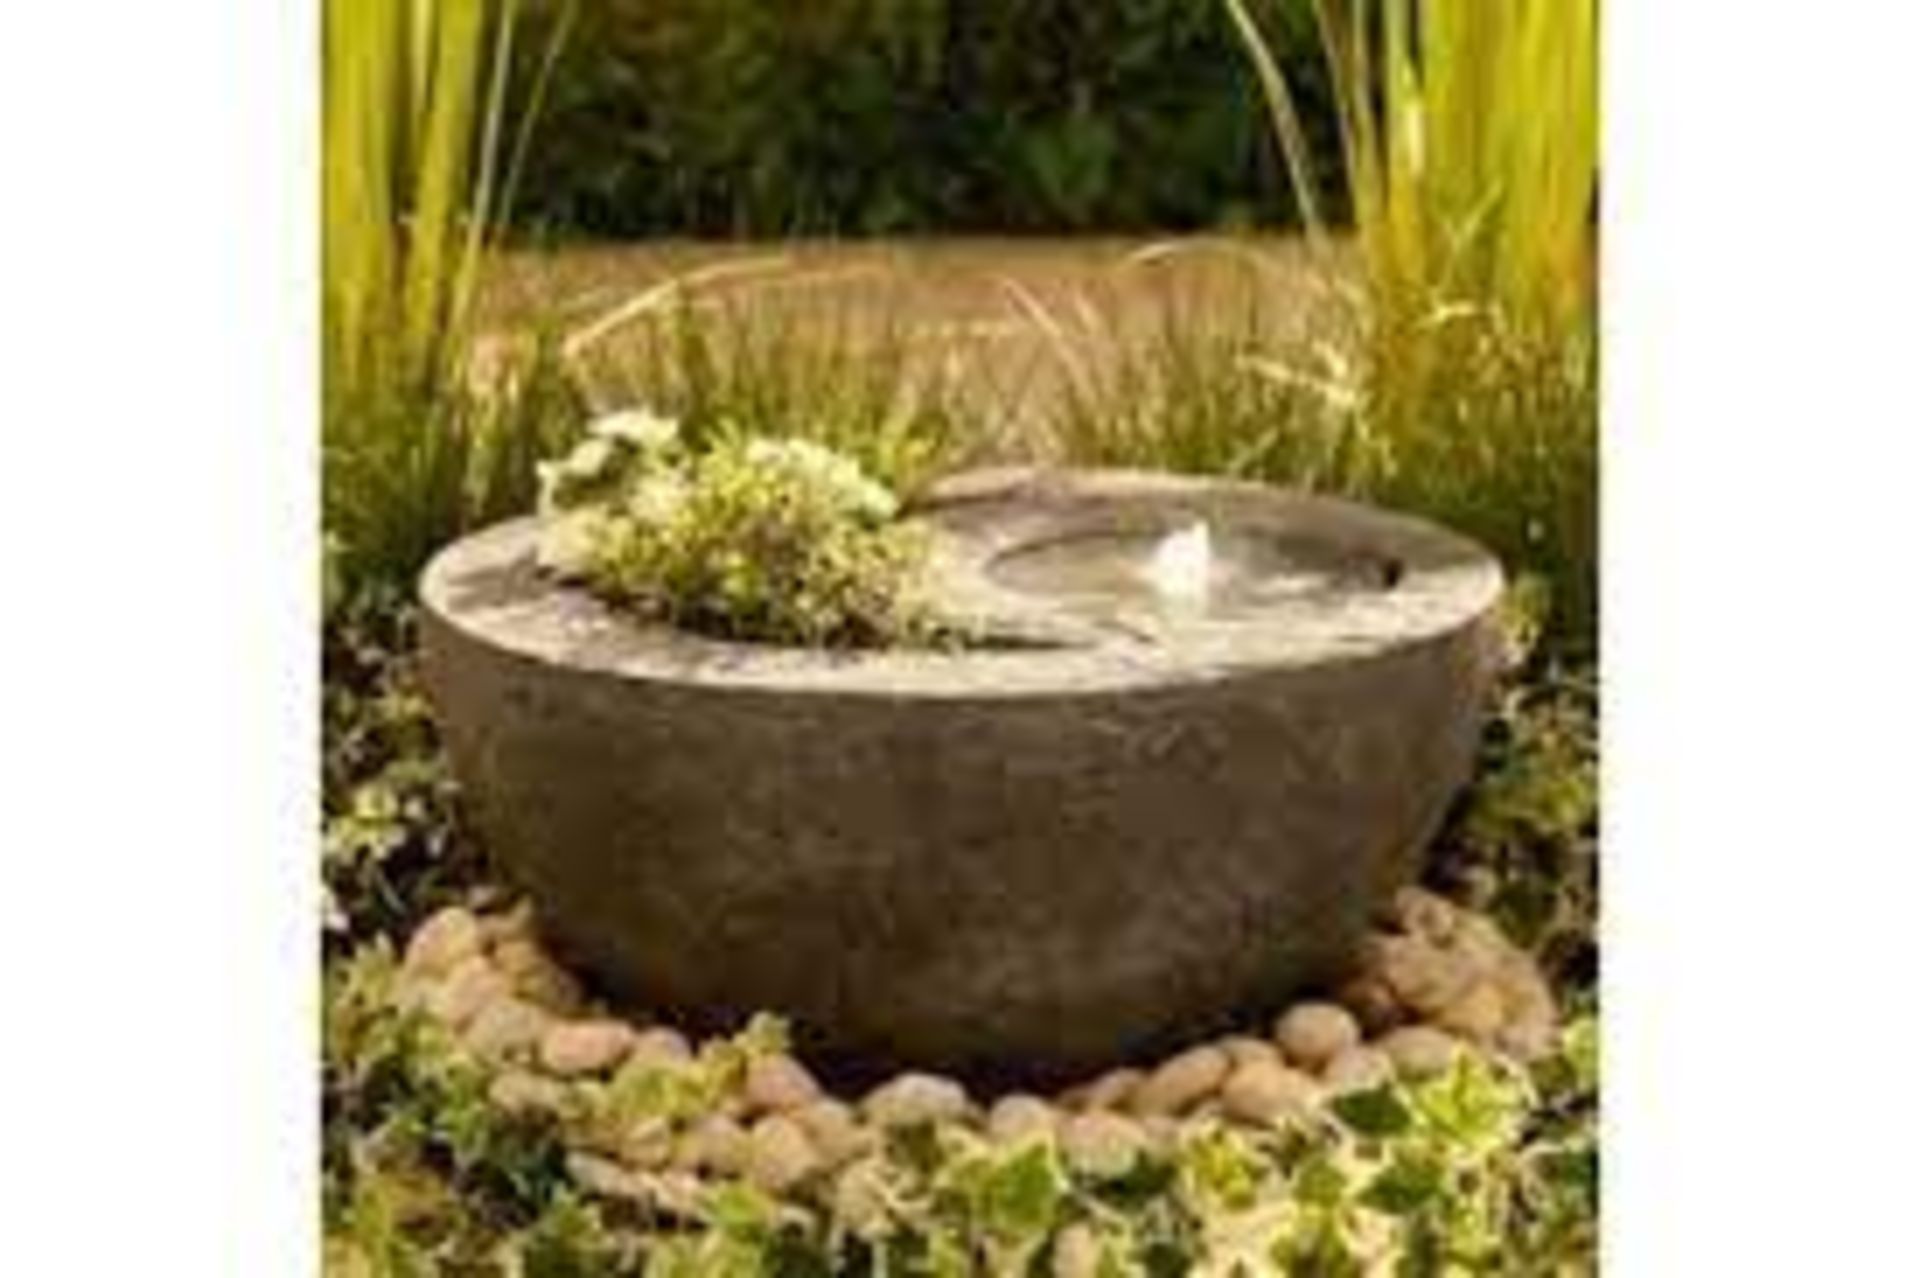 New & Boxed Dual Water Feature and Planter. RRP £299.99 (REF726) - Garden Bowl Design Planter,